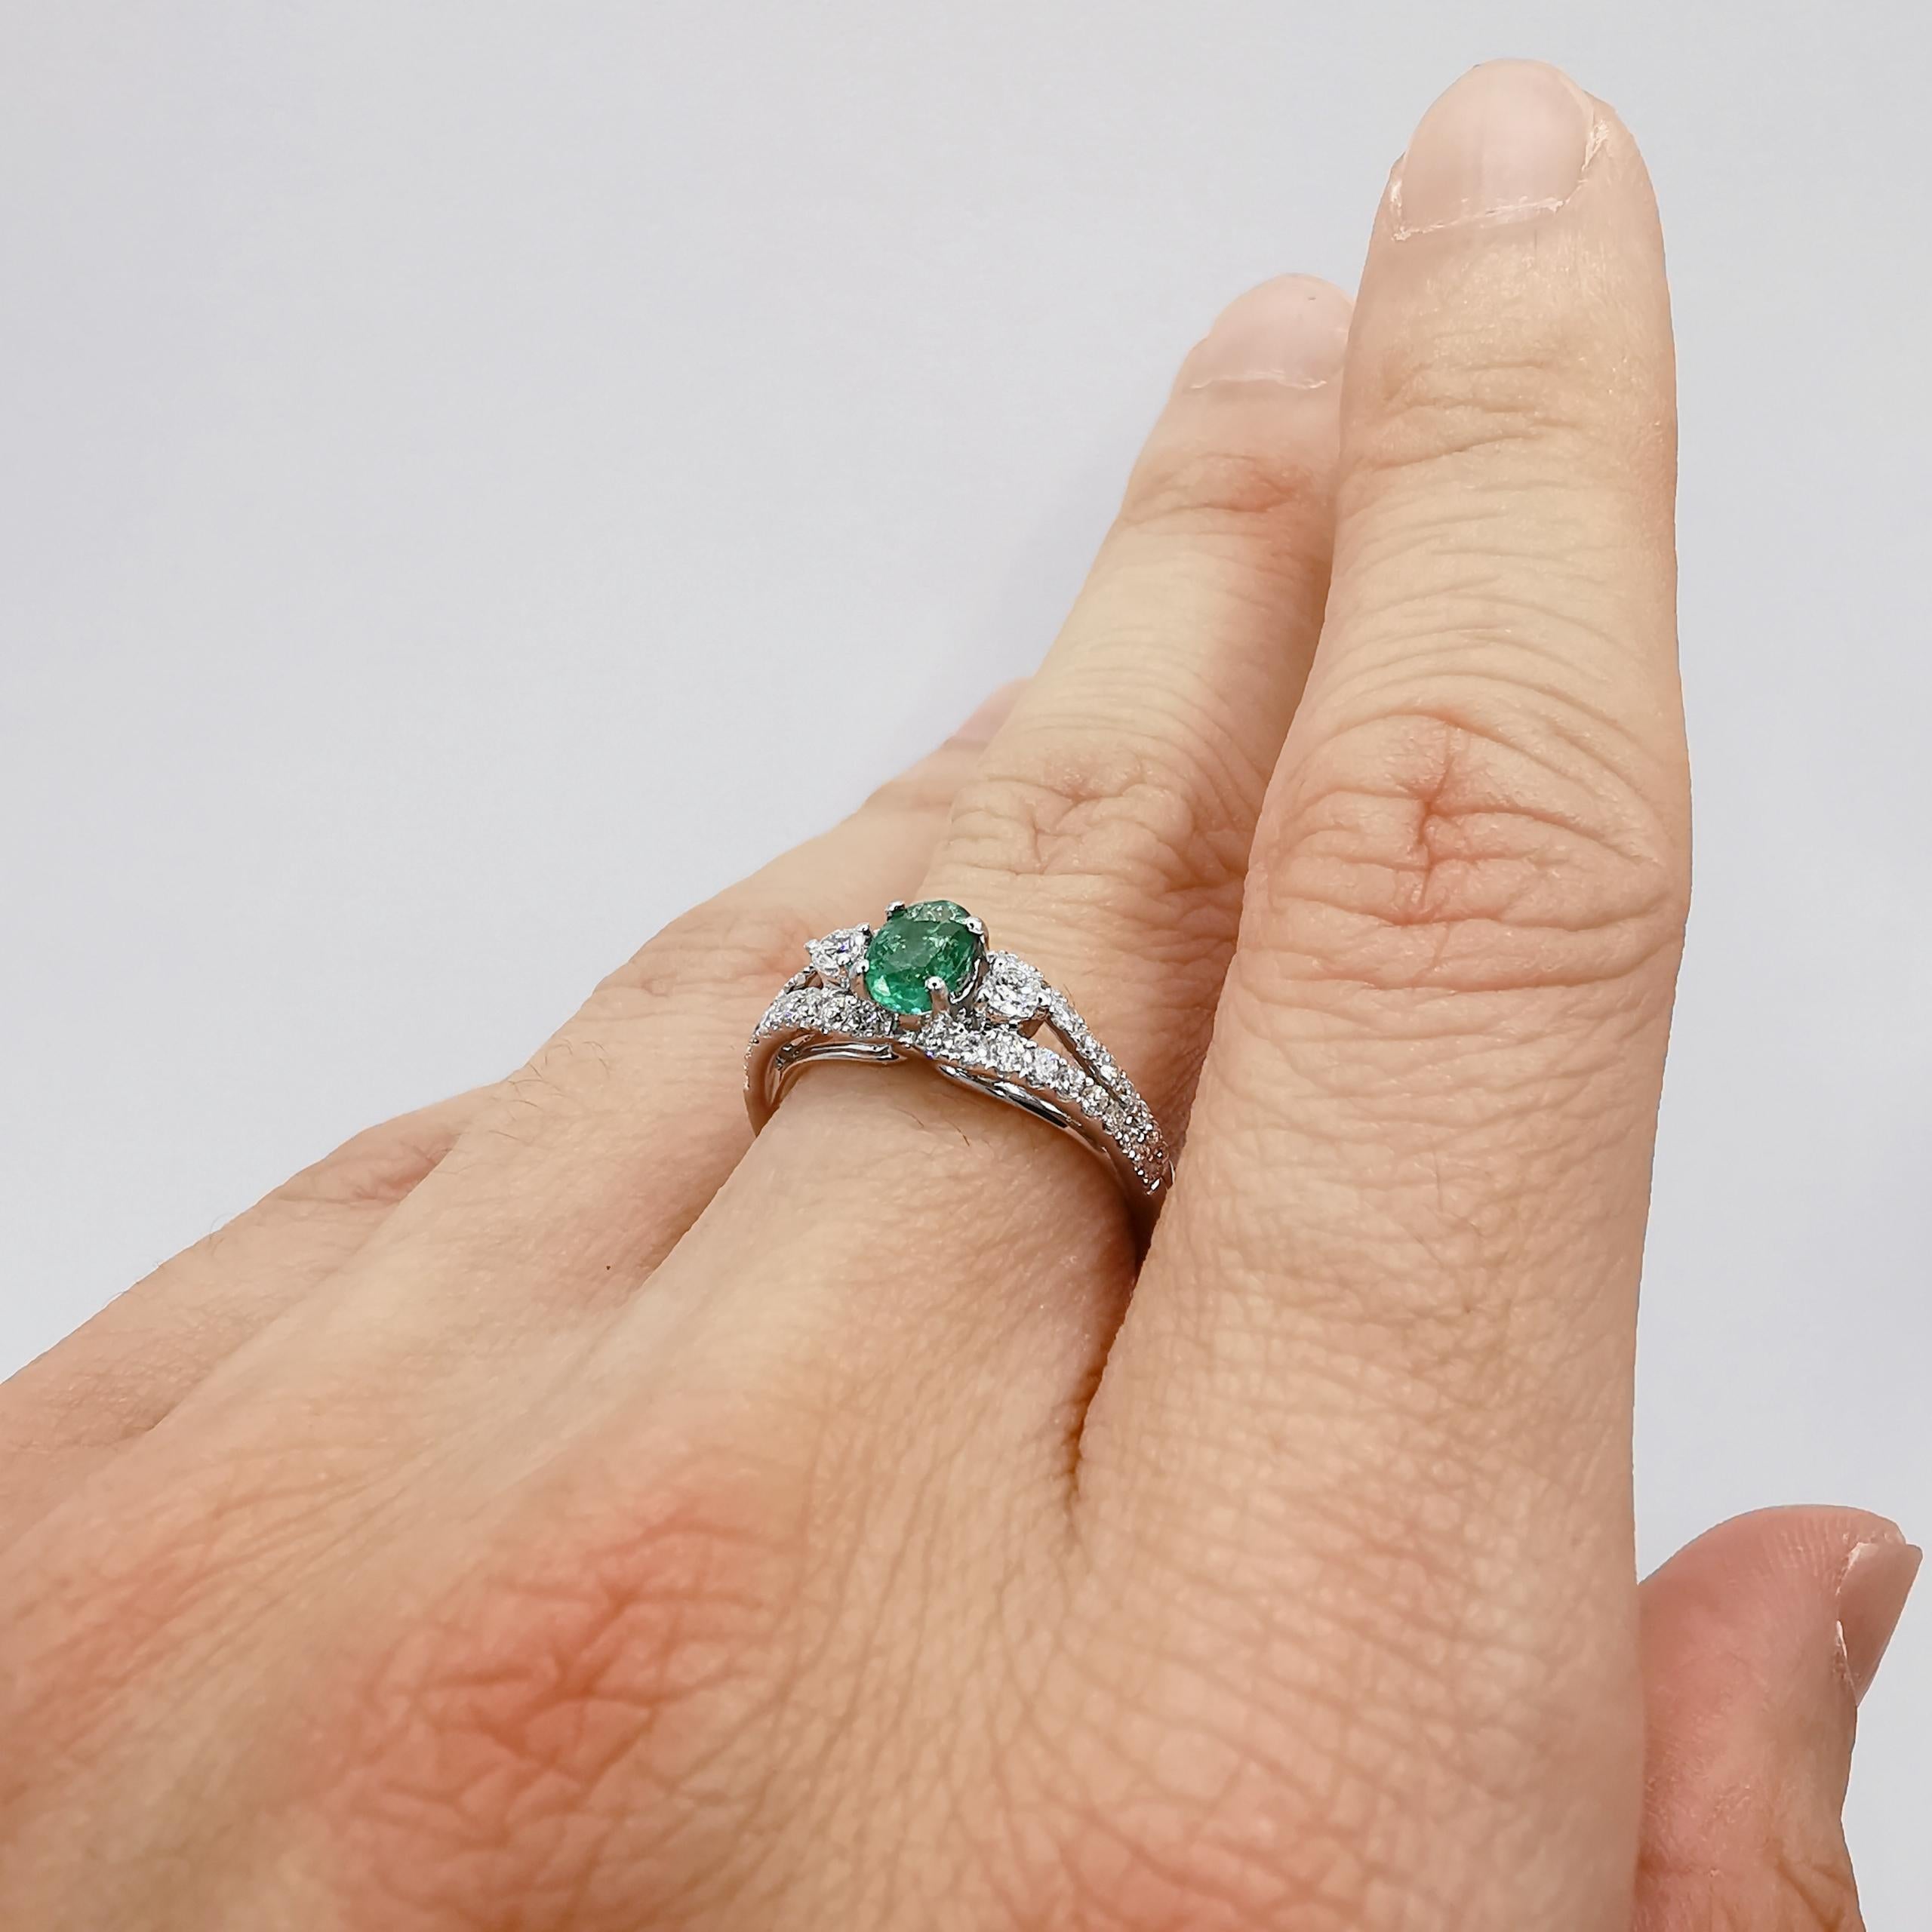 Oval-Cut Vivid Green Emerald Diamond Cluster Ring in 18k White Gold For Sale 3